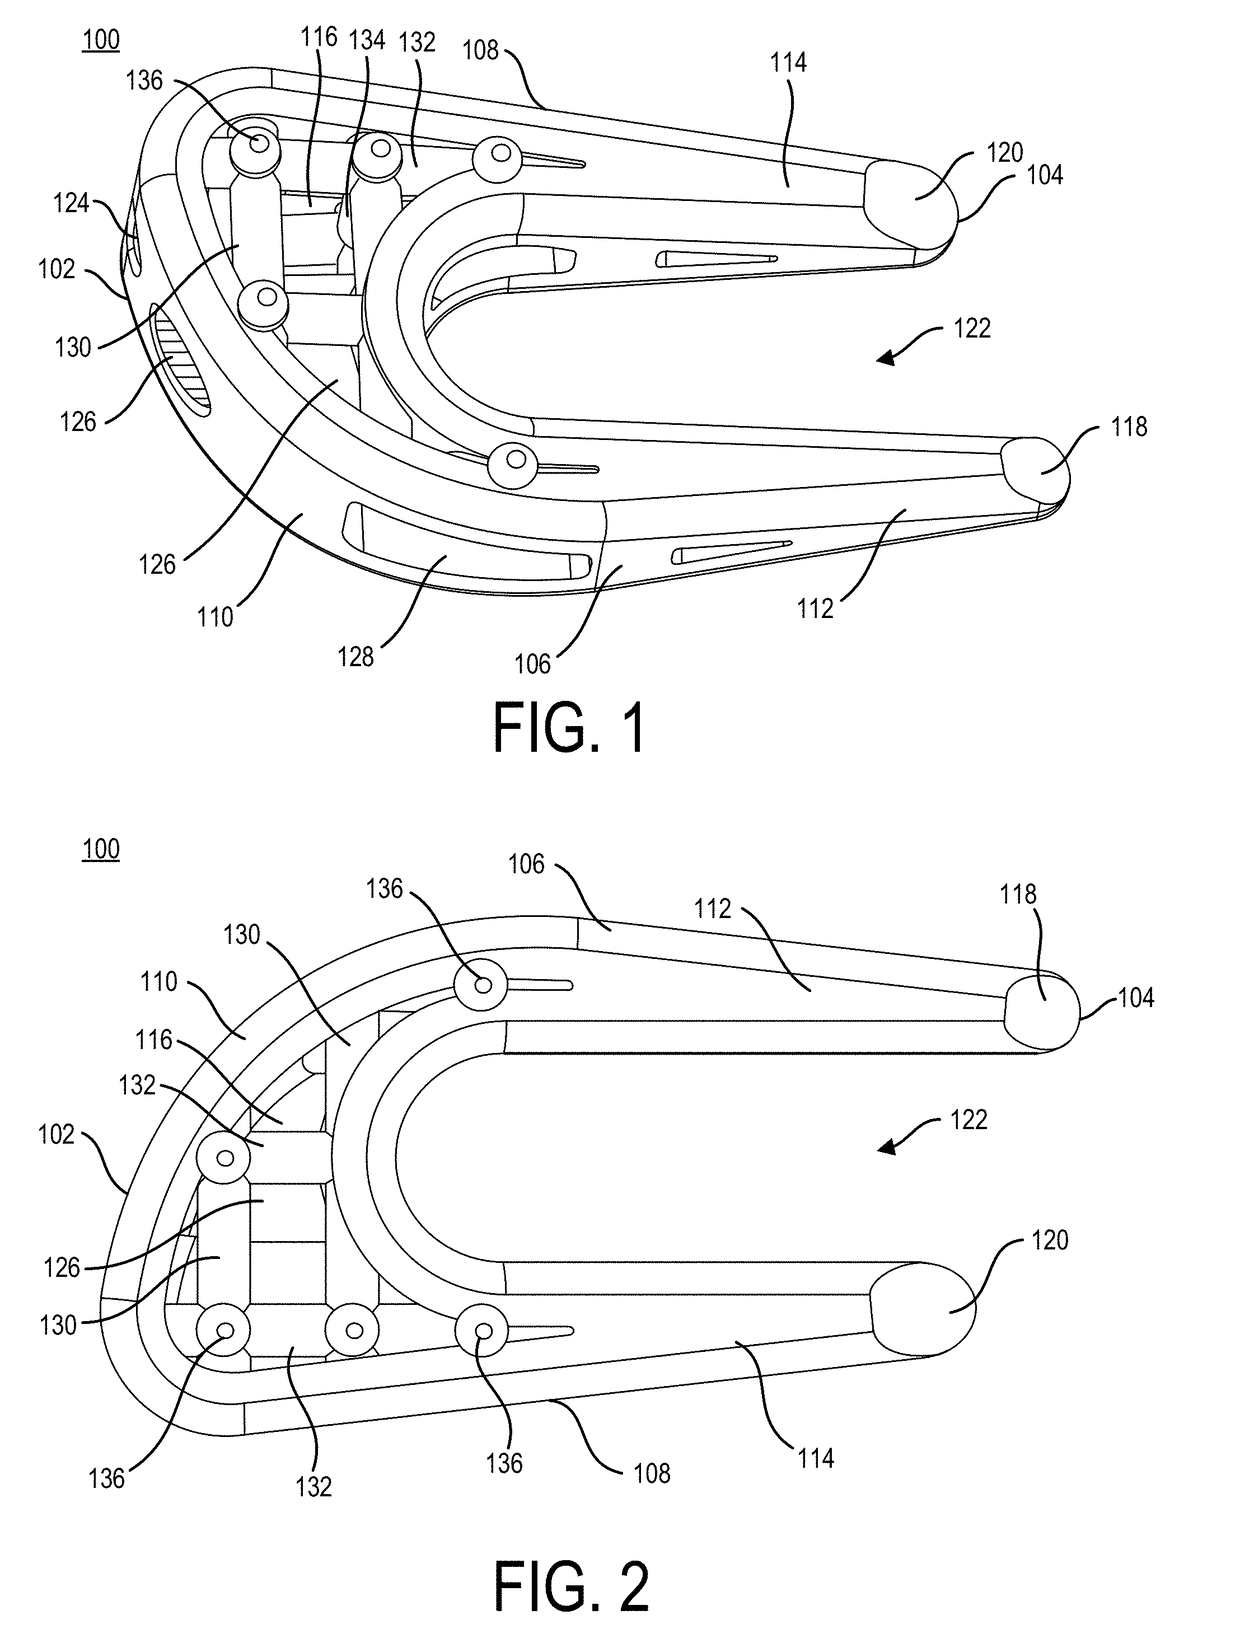 Implants, devices, systems, kits and methods of implanting